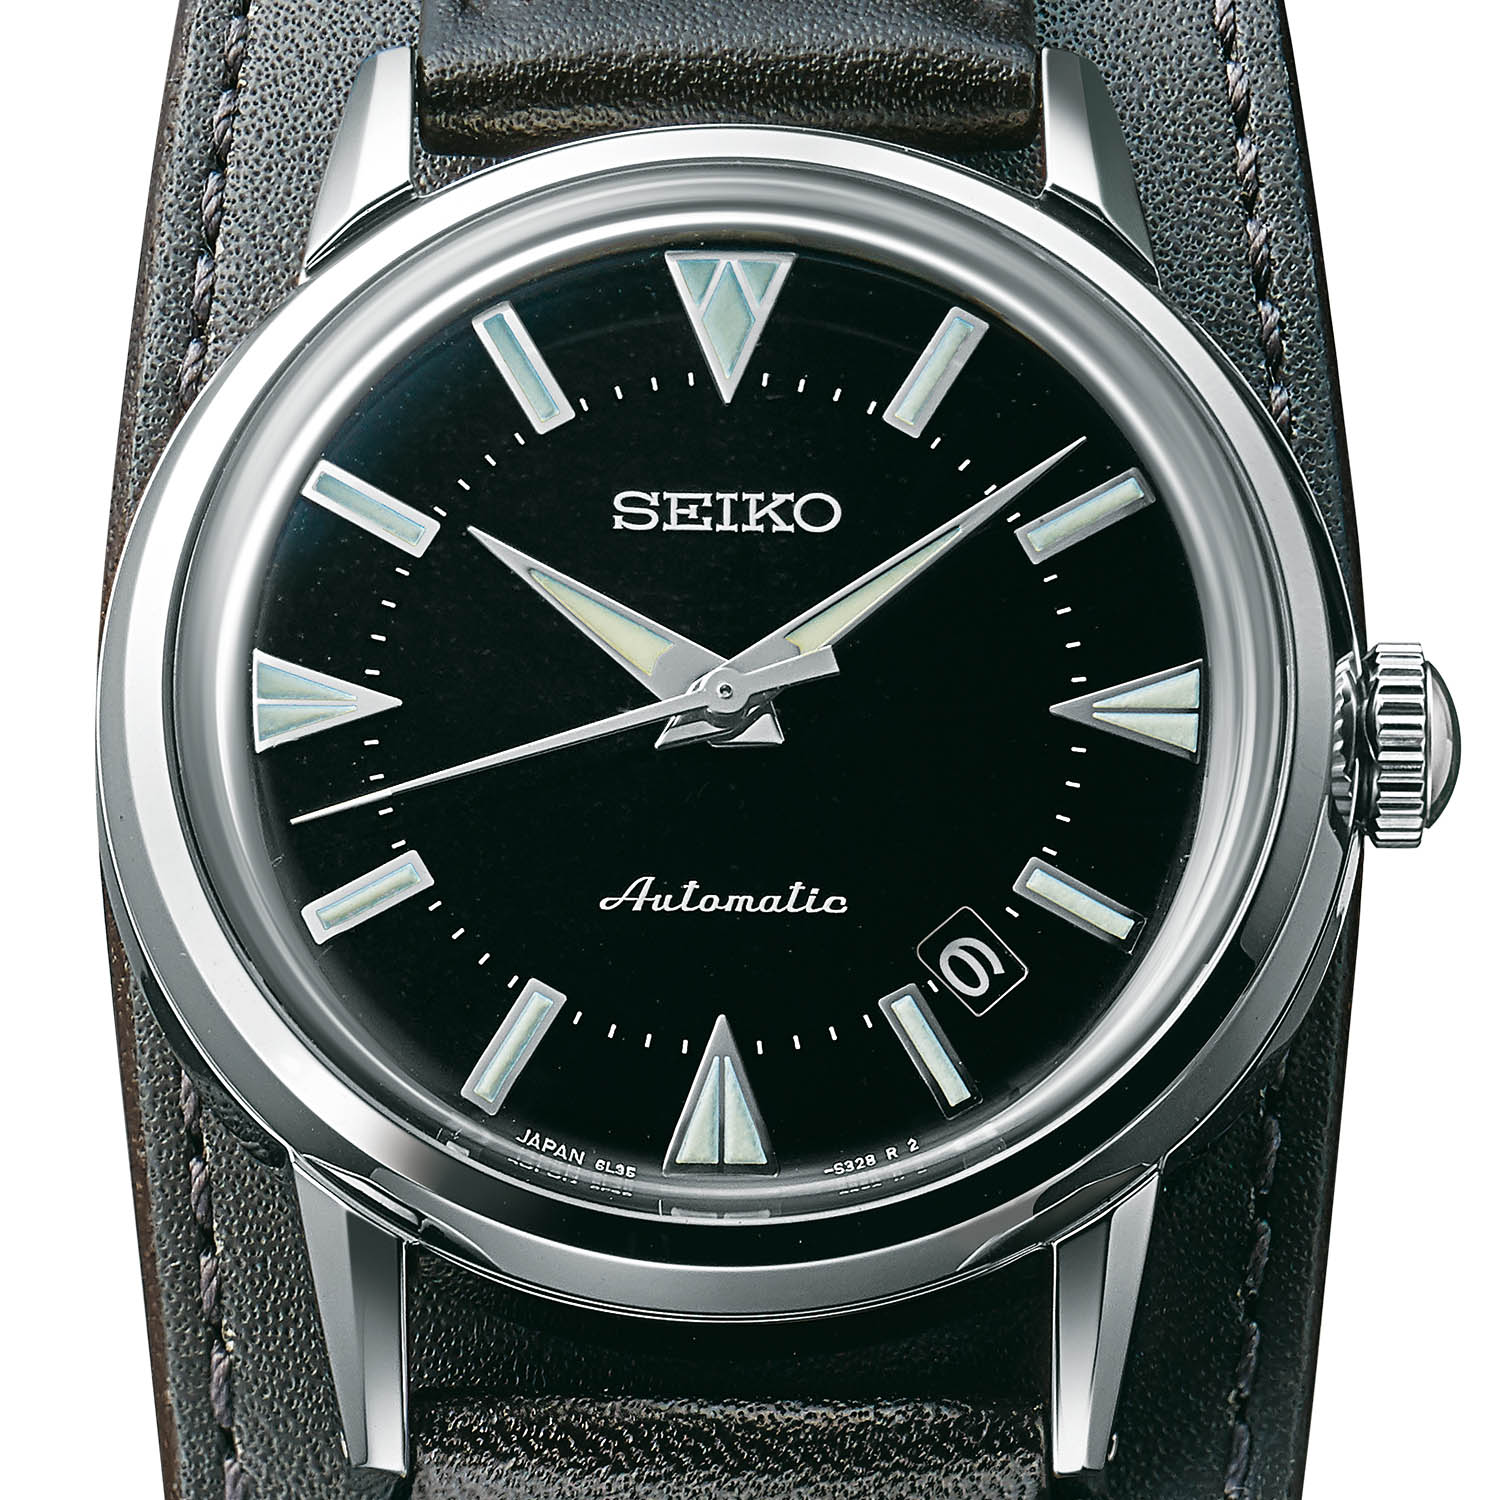 Introducing The Seiko Alpinist Prospex 1959 Re-Creation Watches